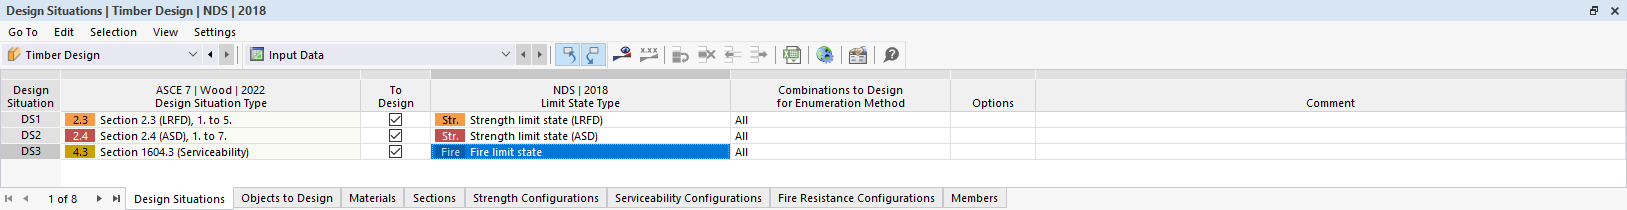 Design Situation Type for Fire Design